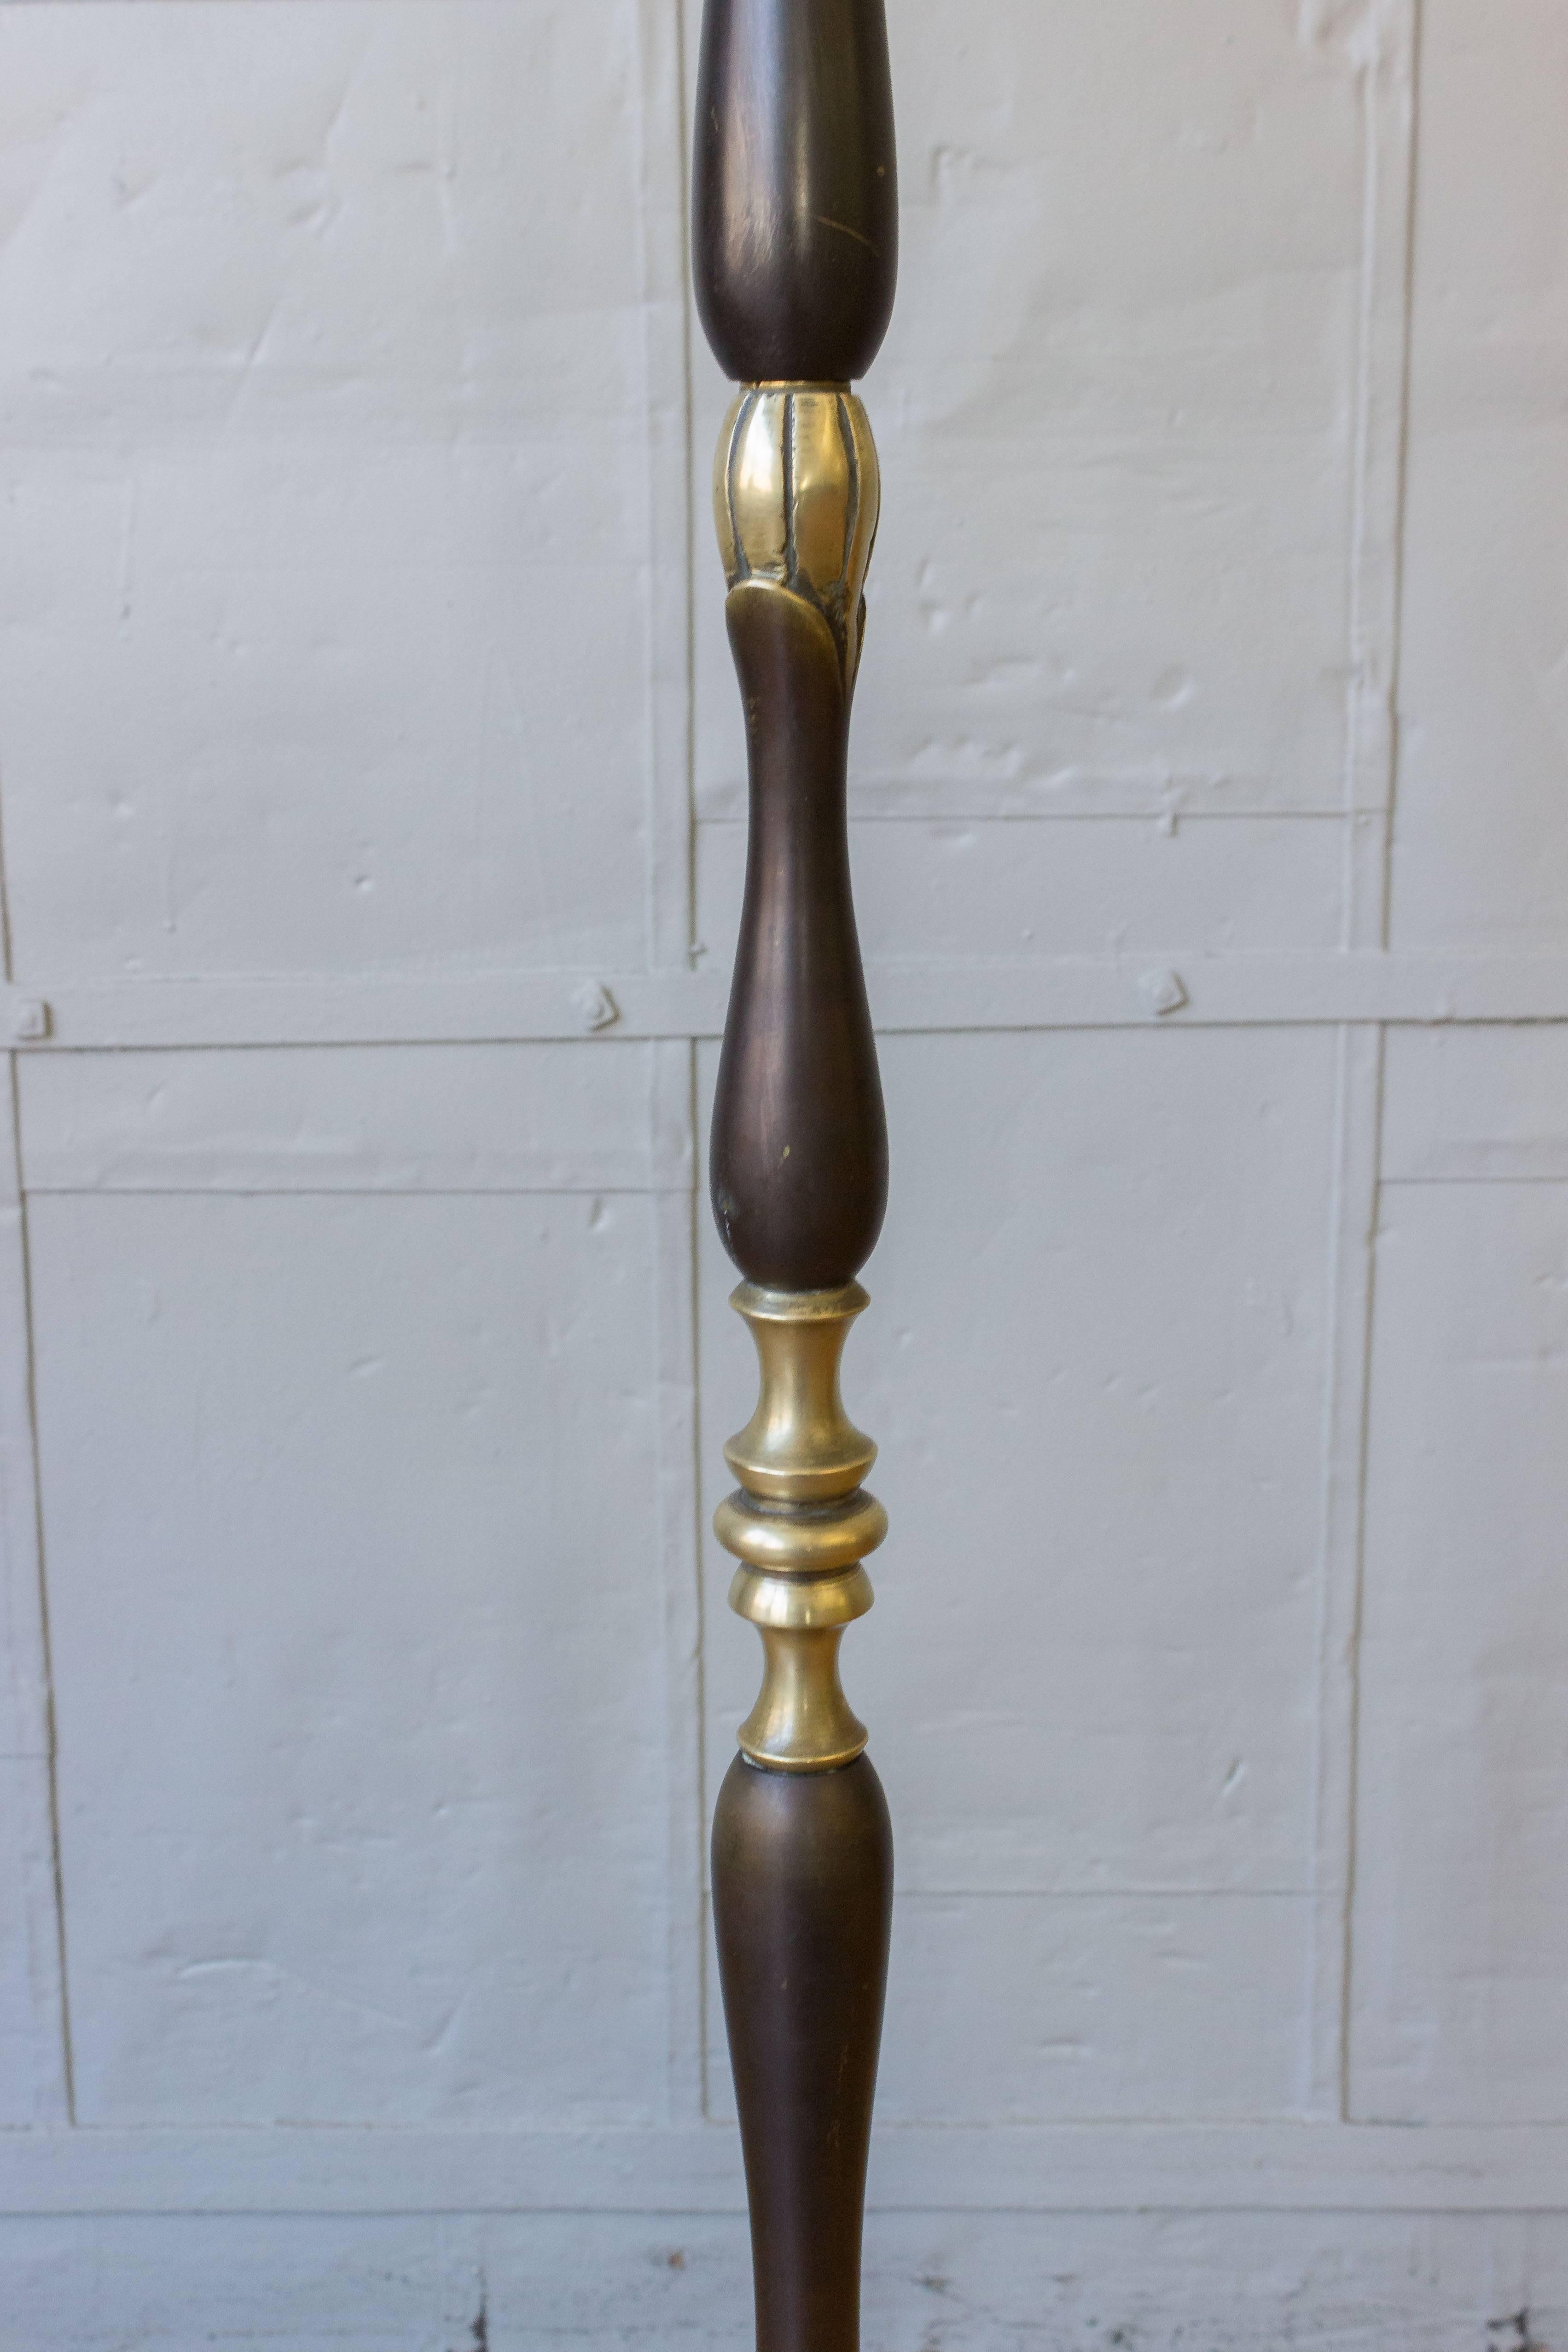 Early 20th Century French 1920s Art Nouveau Style Floor Lamp